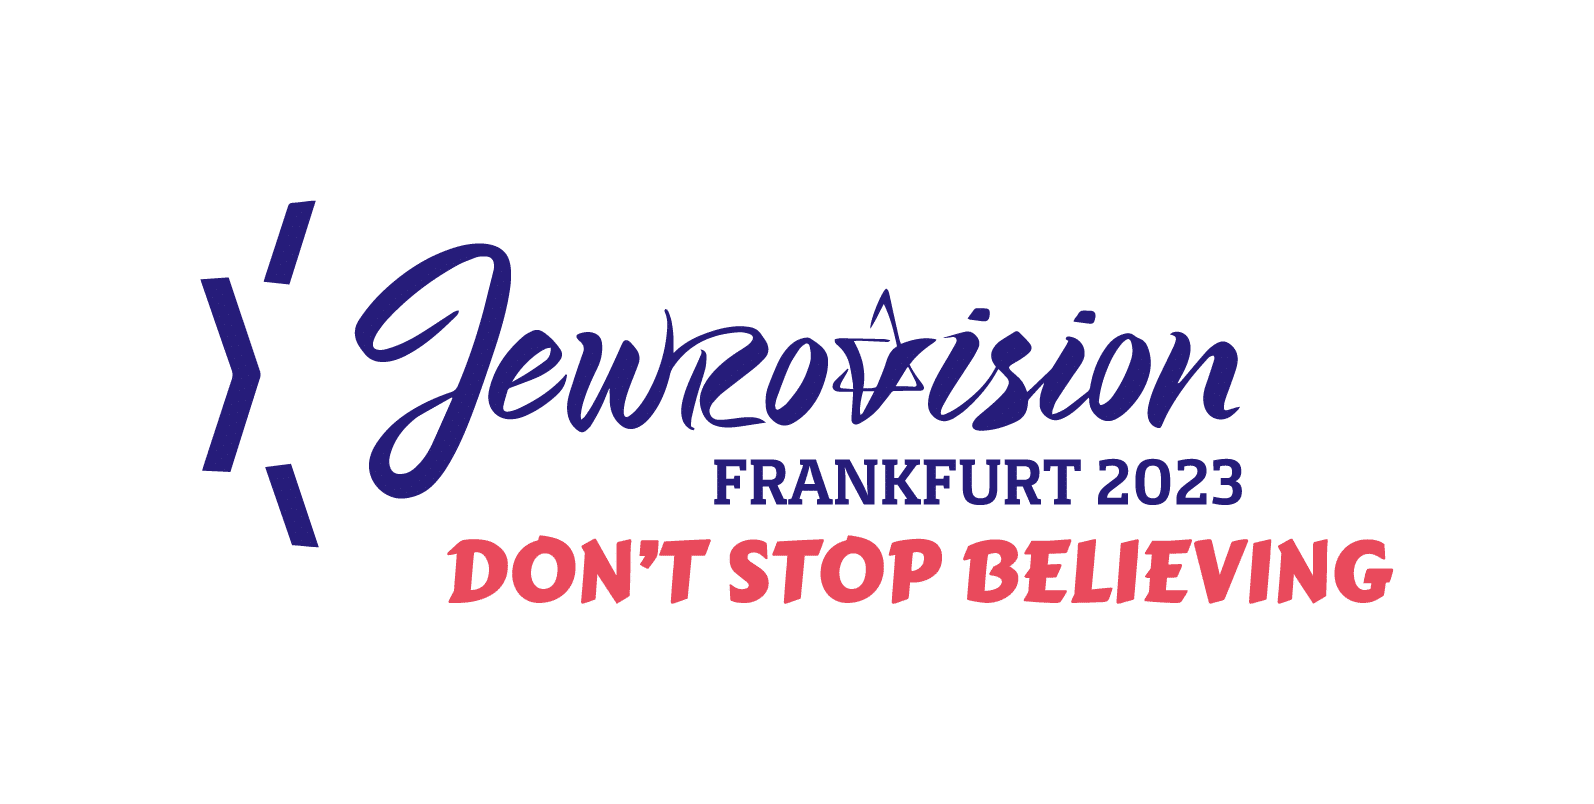 „Don’t Stop Believing“ Jewrovision 2023 in Frankfurt